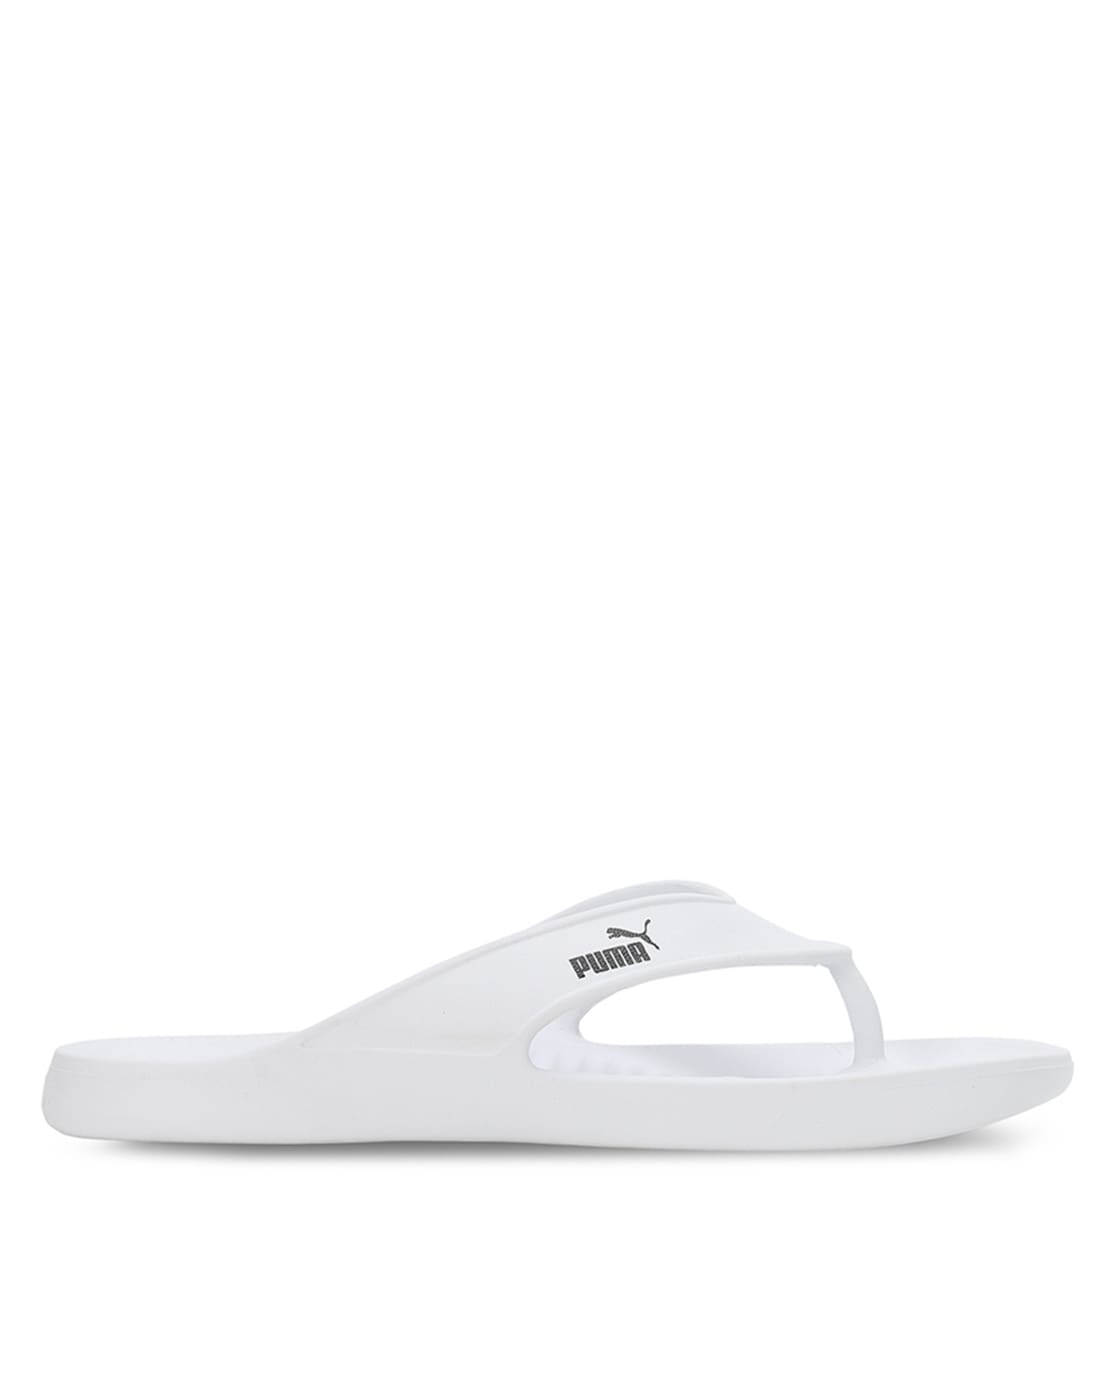 Buy Puma Men Drifter Road IV DP White Flip flops Online at Low Prices in  India - Paytmmall.com